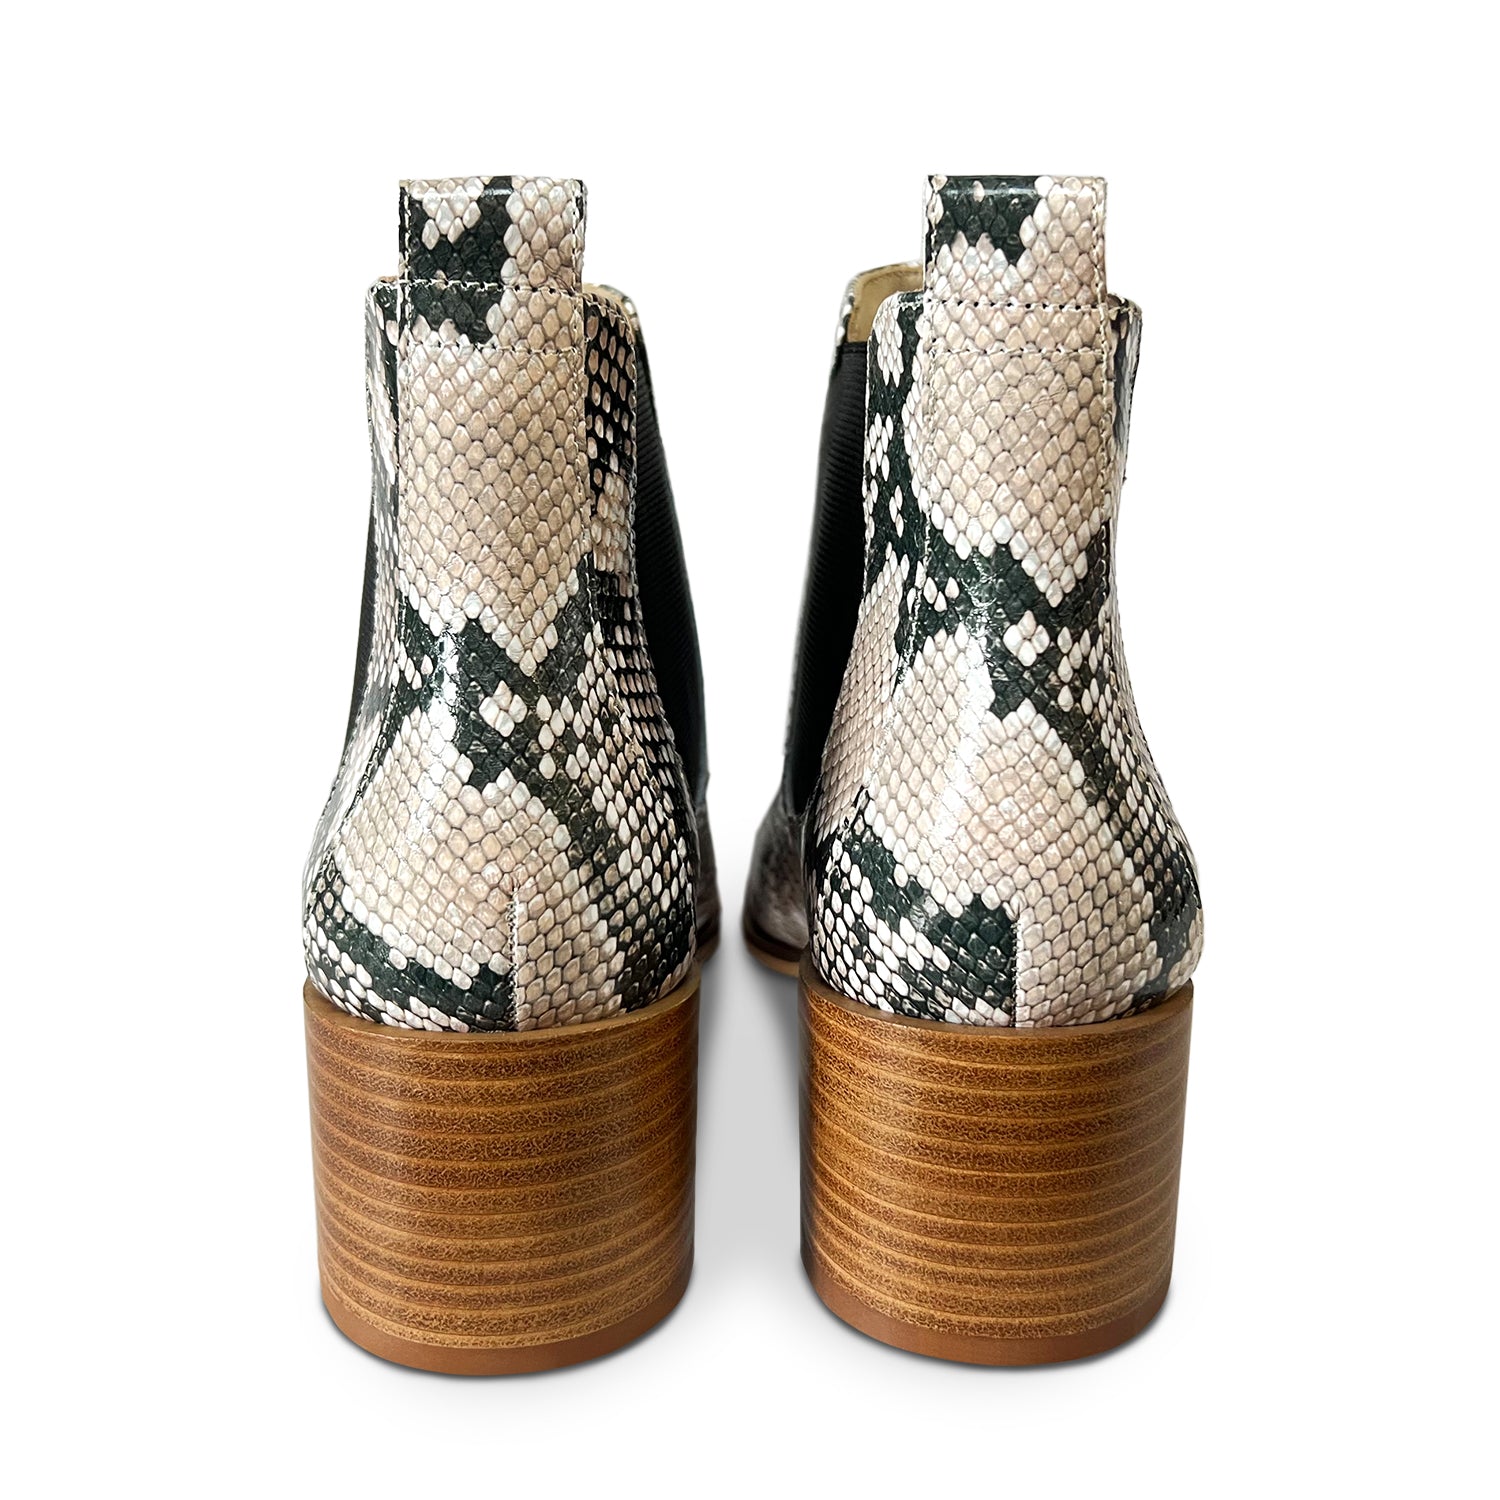 Melissa Chelsea Boot in Natural Snake Leather